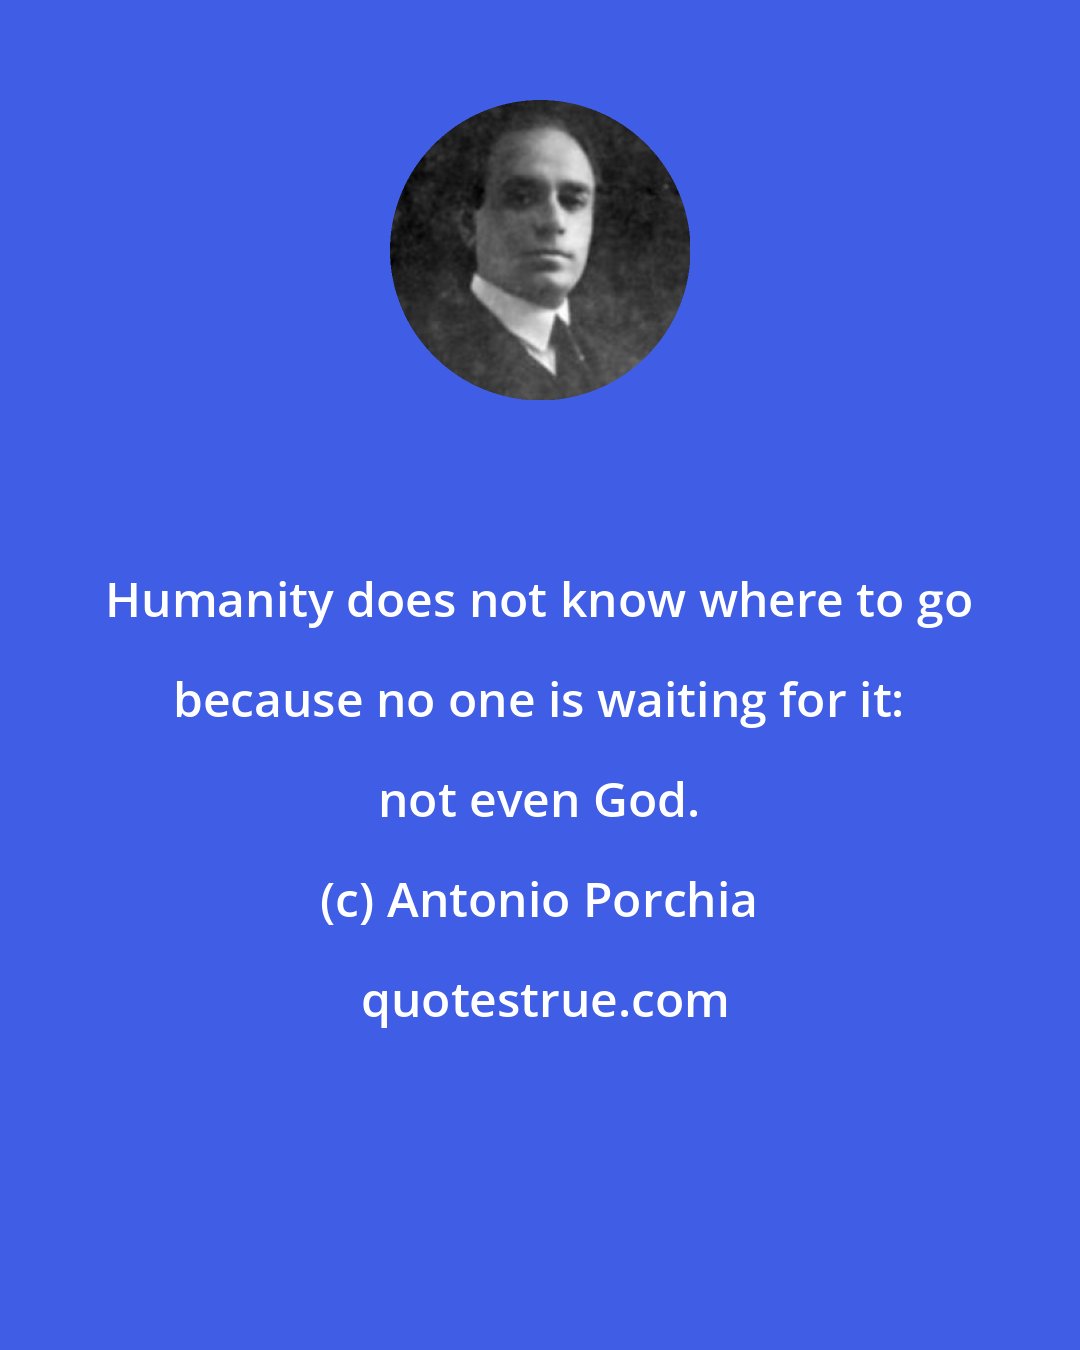 Antonio Porchia: Humanity does not know where to go because no one is waiting for it: not even God.